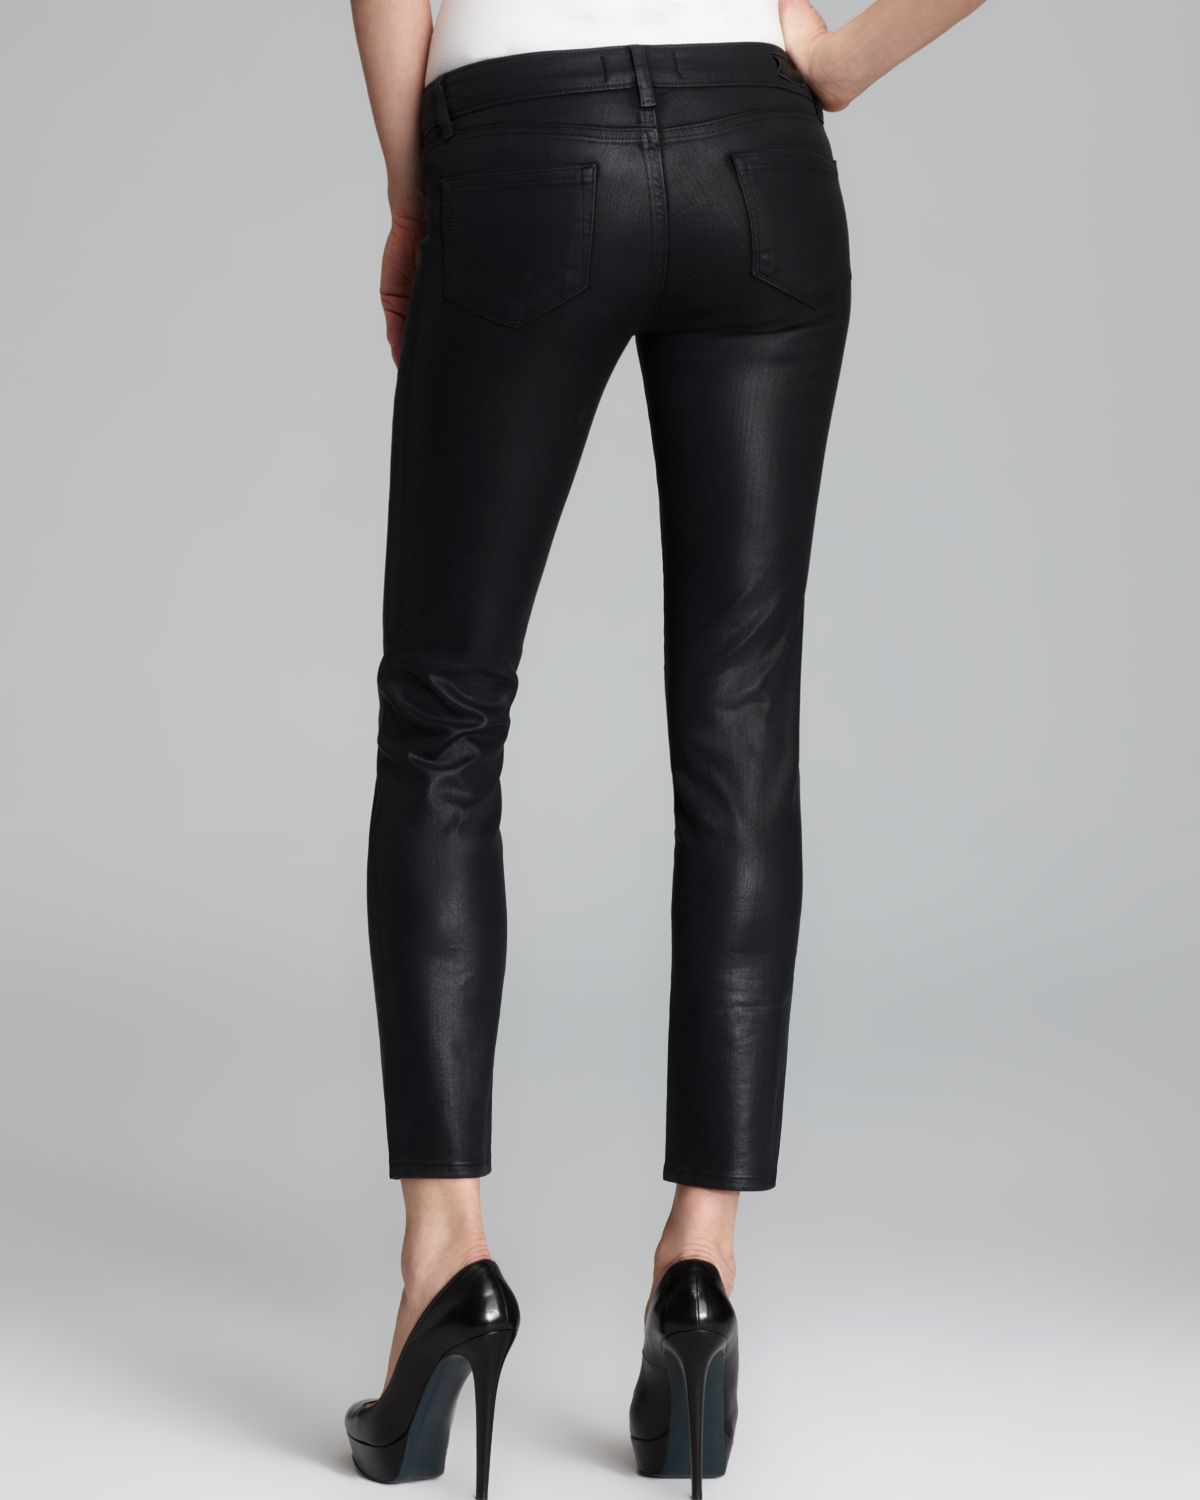 PAIGE Jeans - Verdugo Ultra Skinny Ankle In Black Silk - Lyst